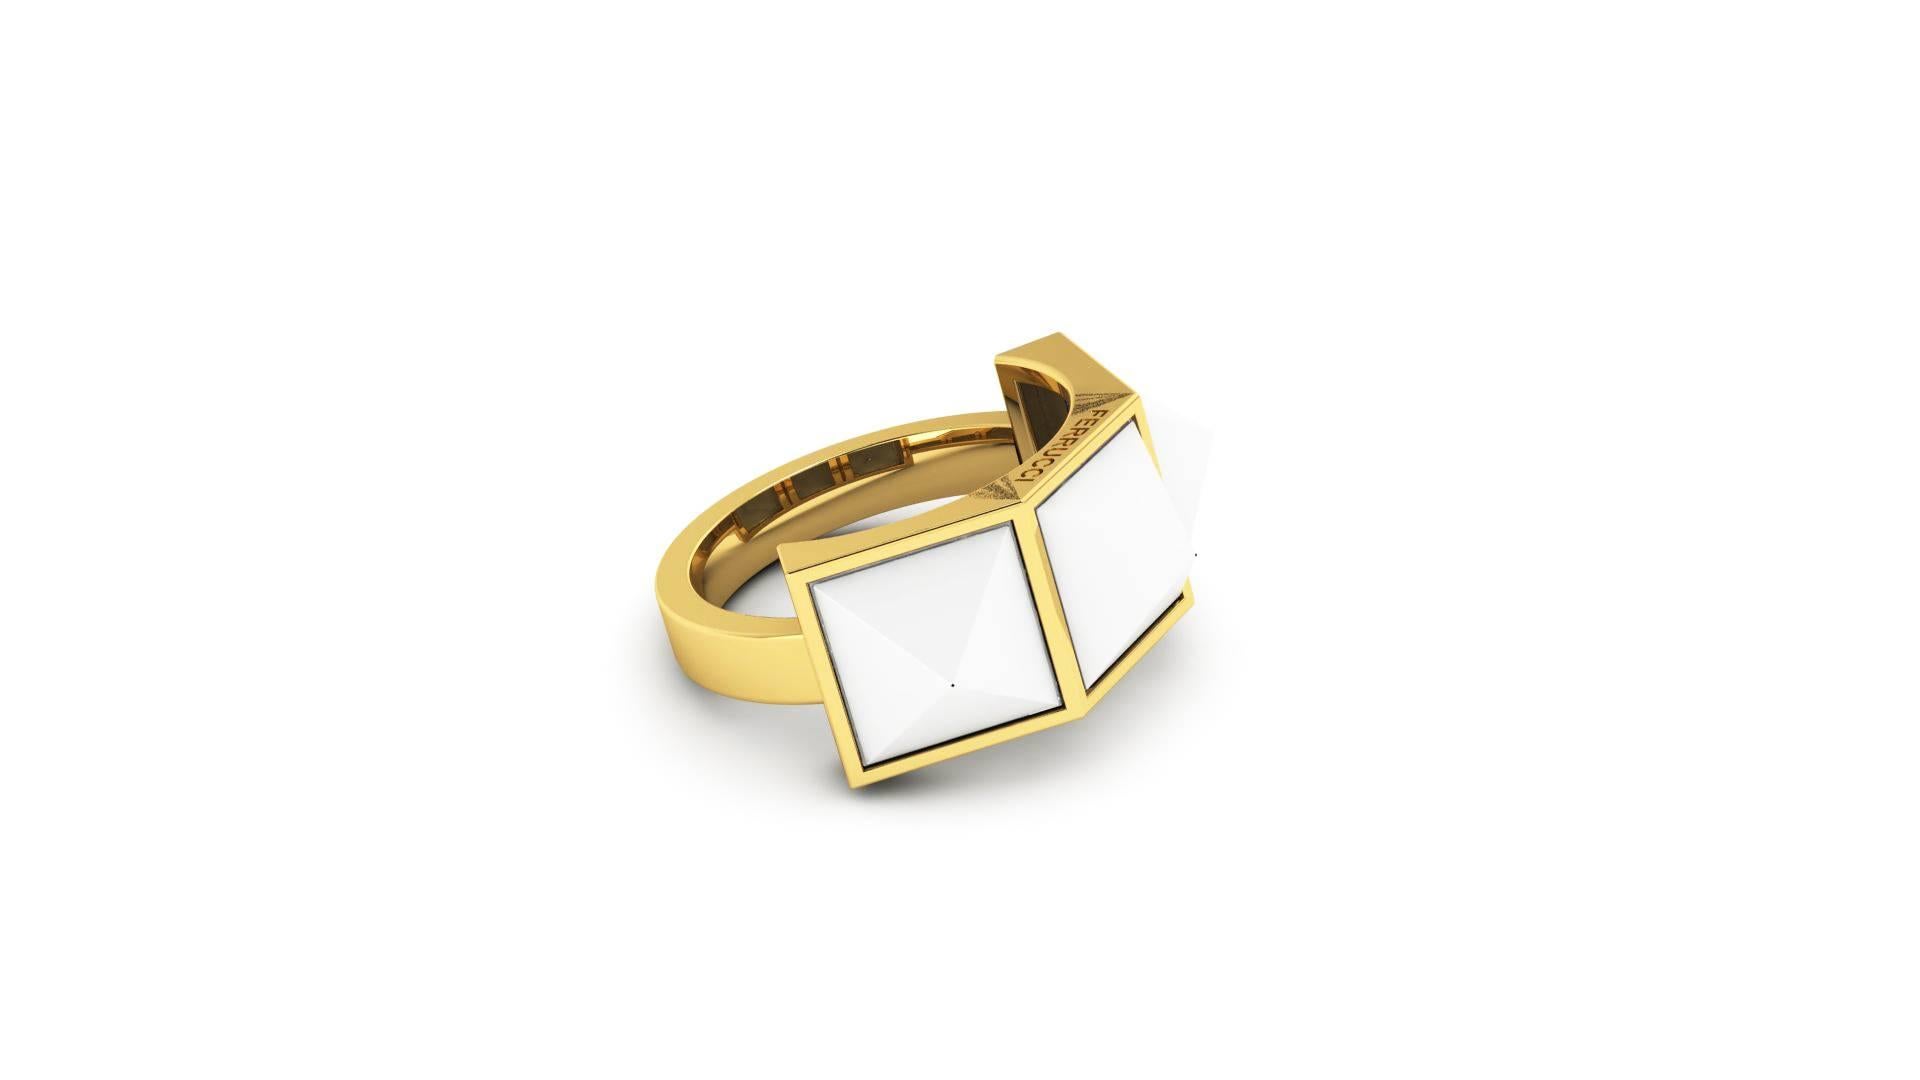 Pyramid, a three white agate Pyramid ring in 18k yellow gold made in New York.

Size 6 adjustable upon request

Agate's most noticeable properties overall are balancing yin/yang energy, courage, protection, healing, and calming.

For a strong woman